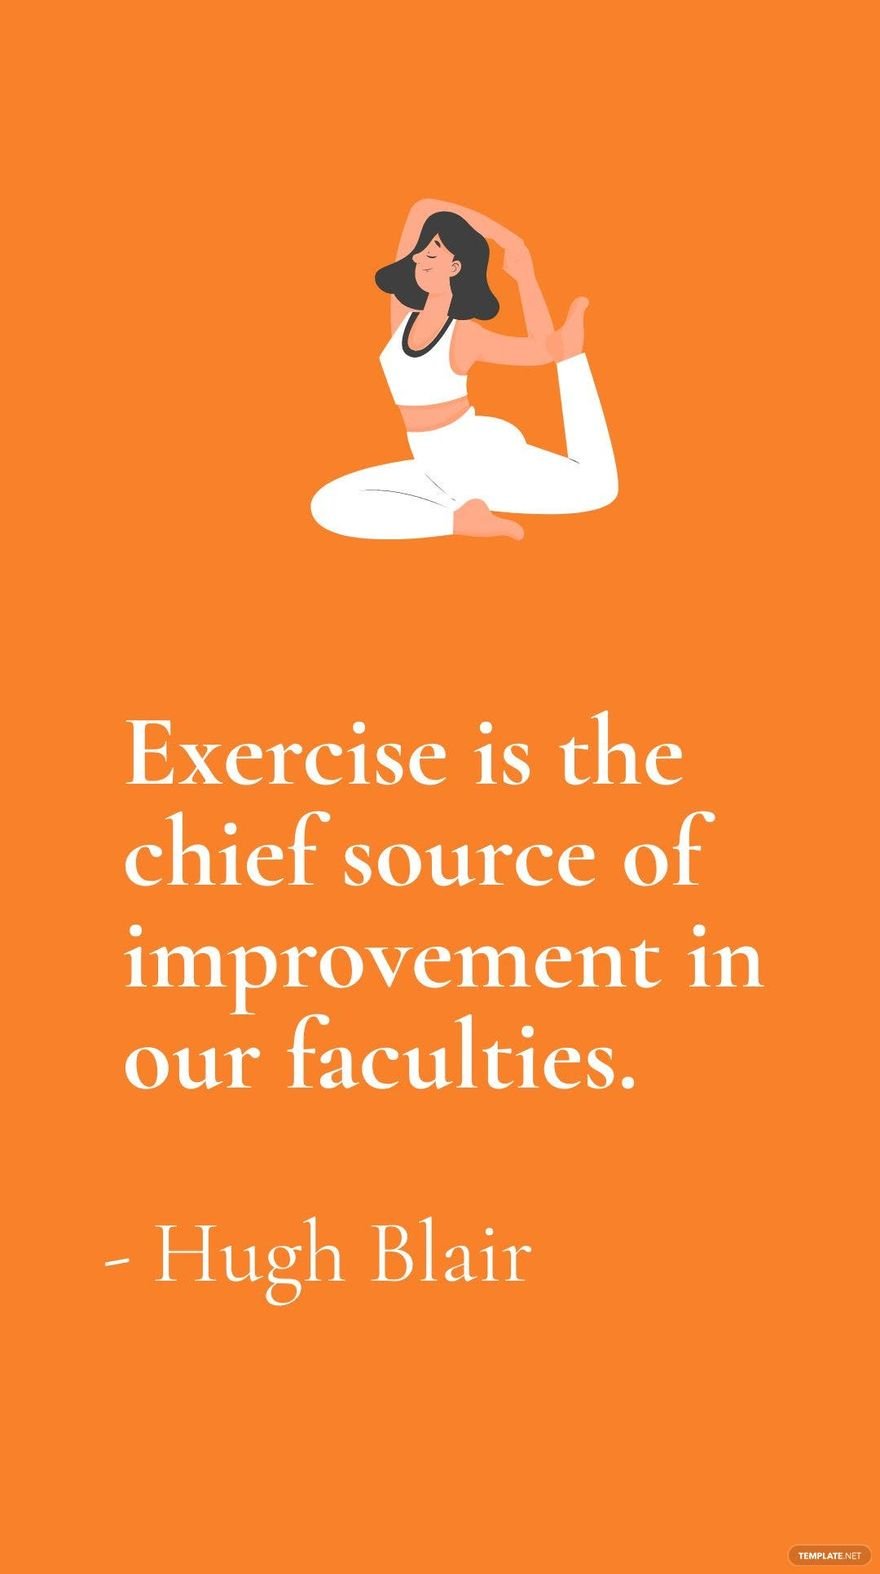 Free Hugh Blair - Exercise is the chief source of improvement in our faculties. in JPG